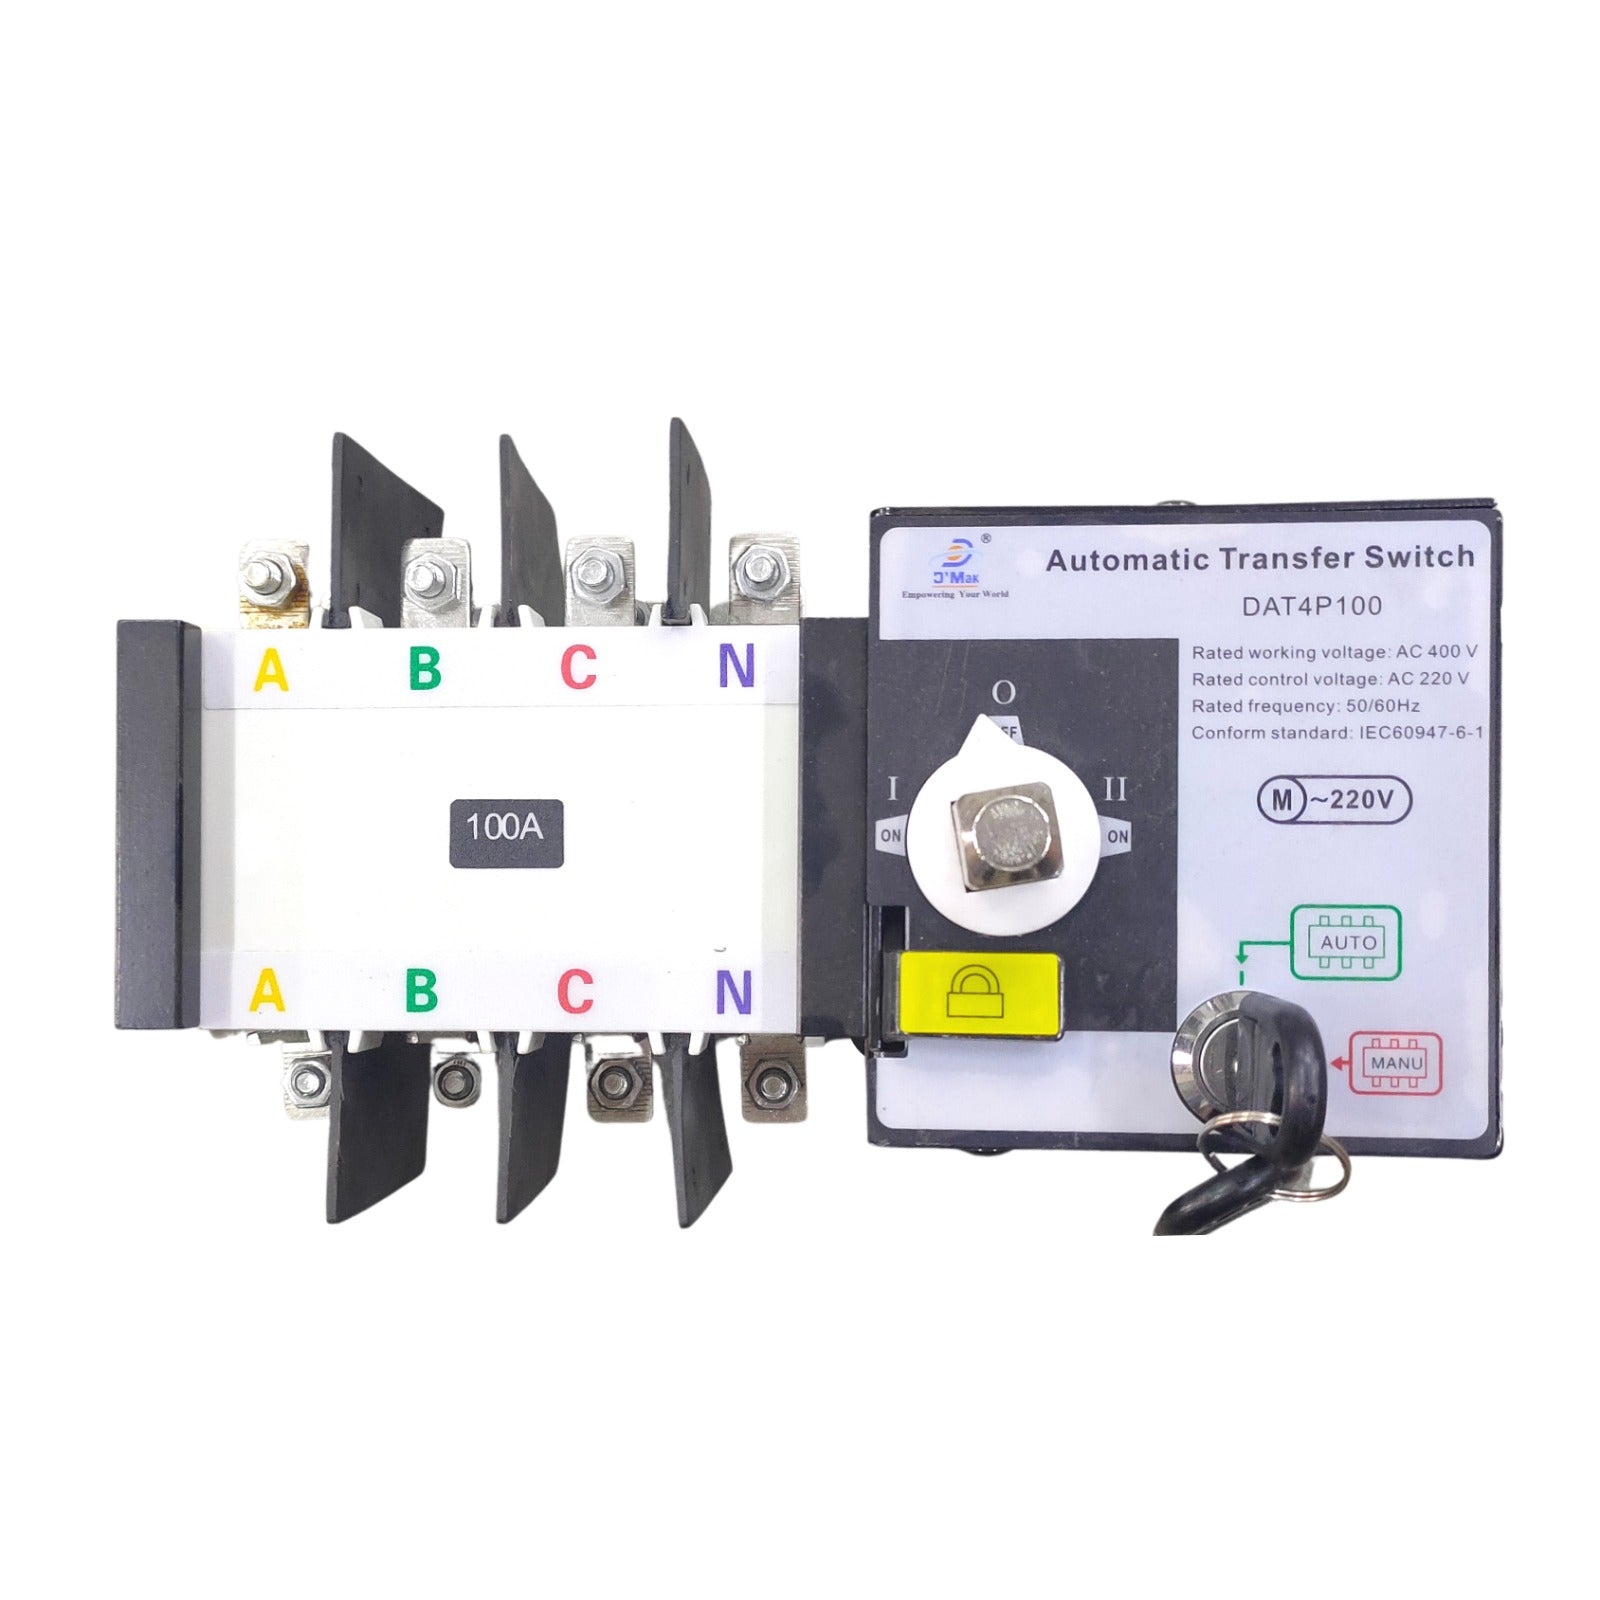 DMAK Switchgear 4P 100A AUTOMATIC TRANSFER SWITCH (WITHOUT ENCLOSURE) (DAT4P100)